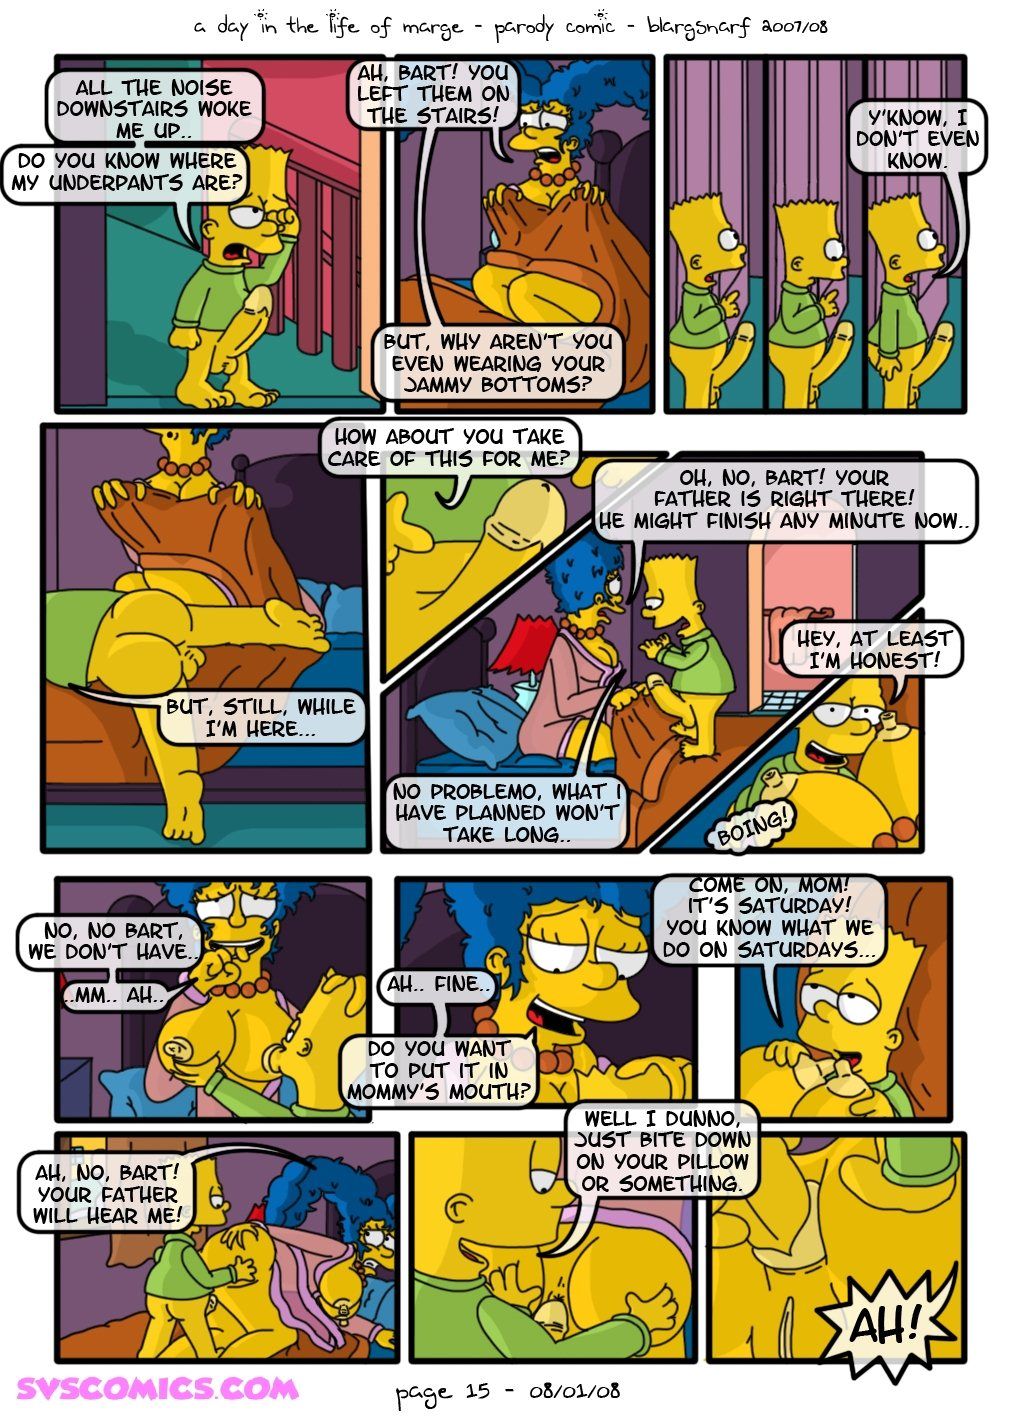 [Blargsnarf] A Day Life of Marge (The Simpsons) page 16